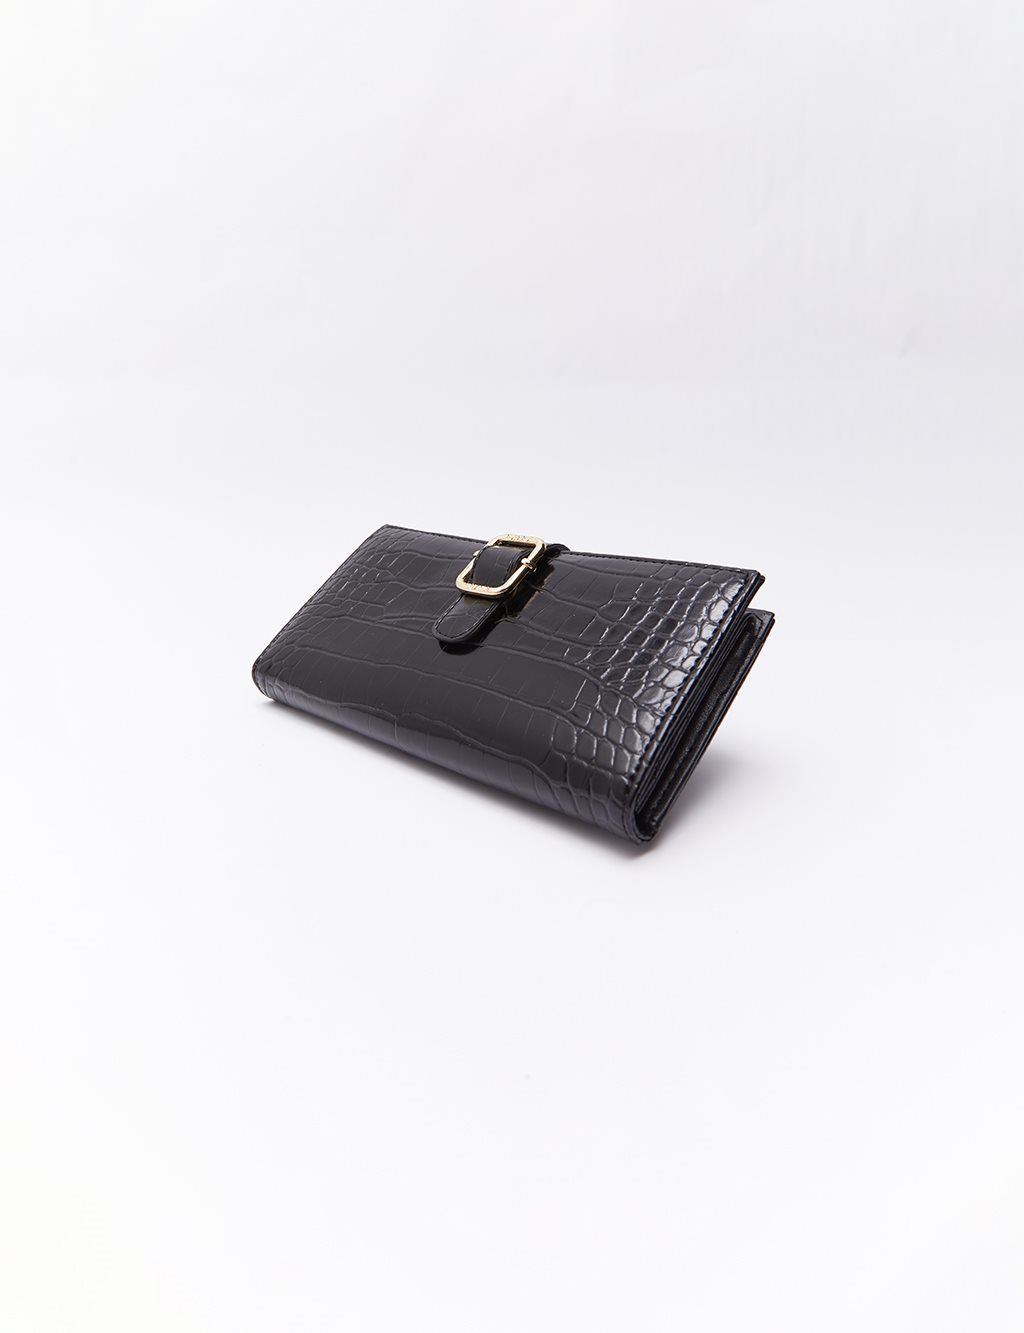 Croco Patterned Patent Leather Wallet Black